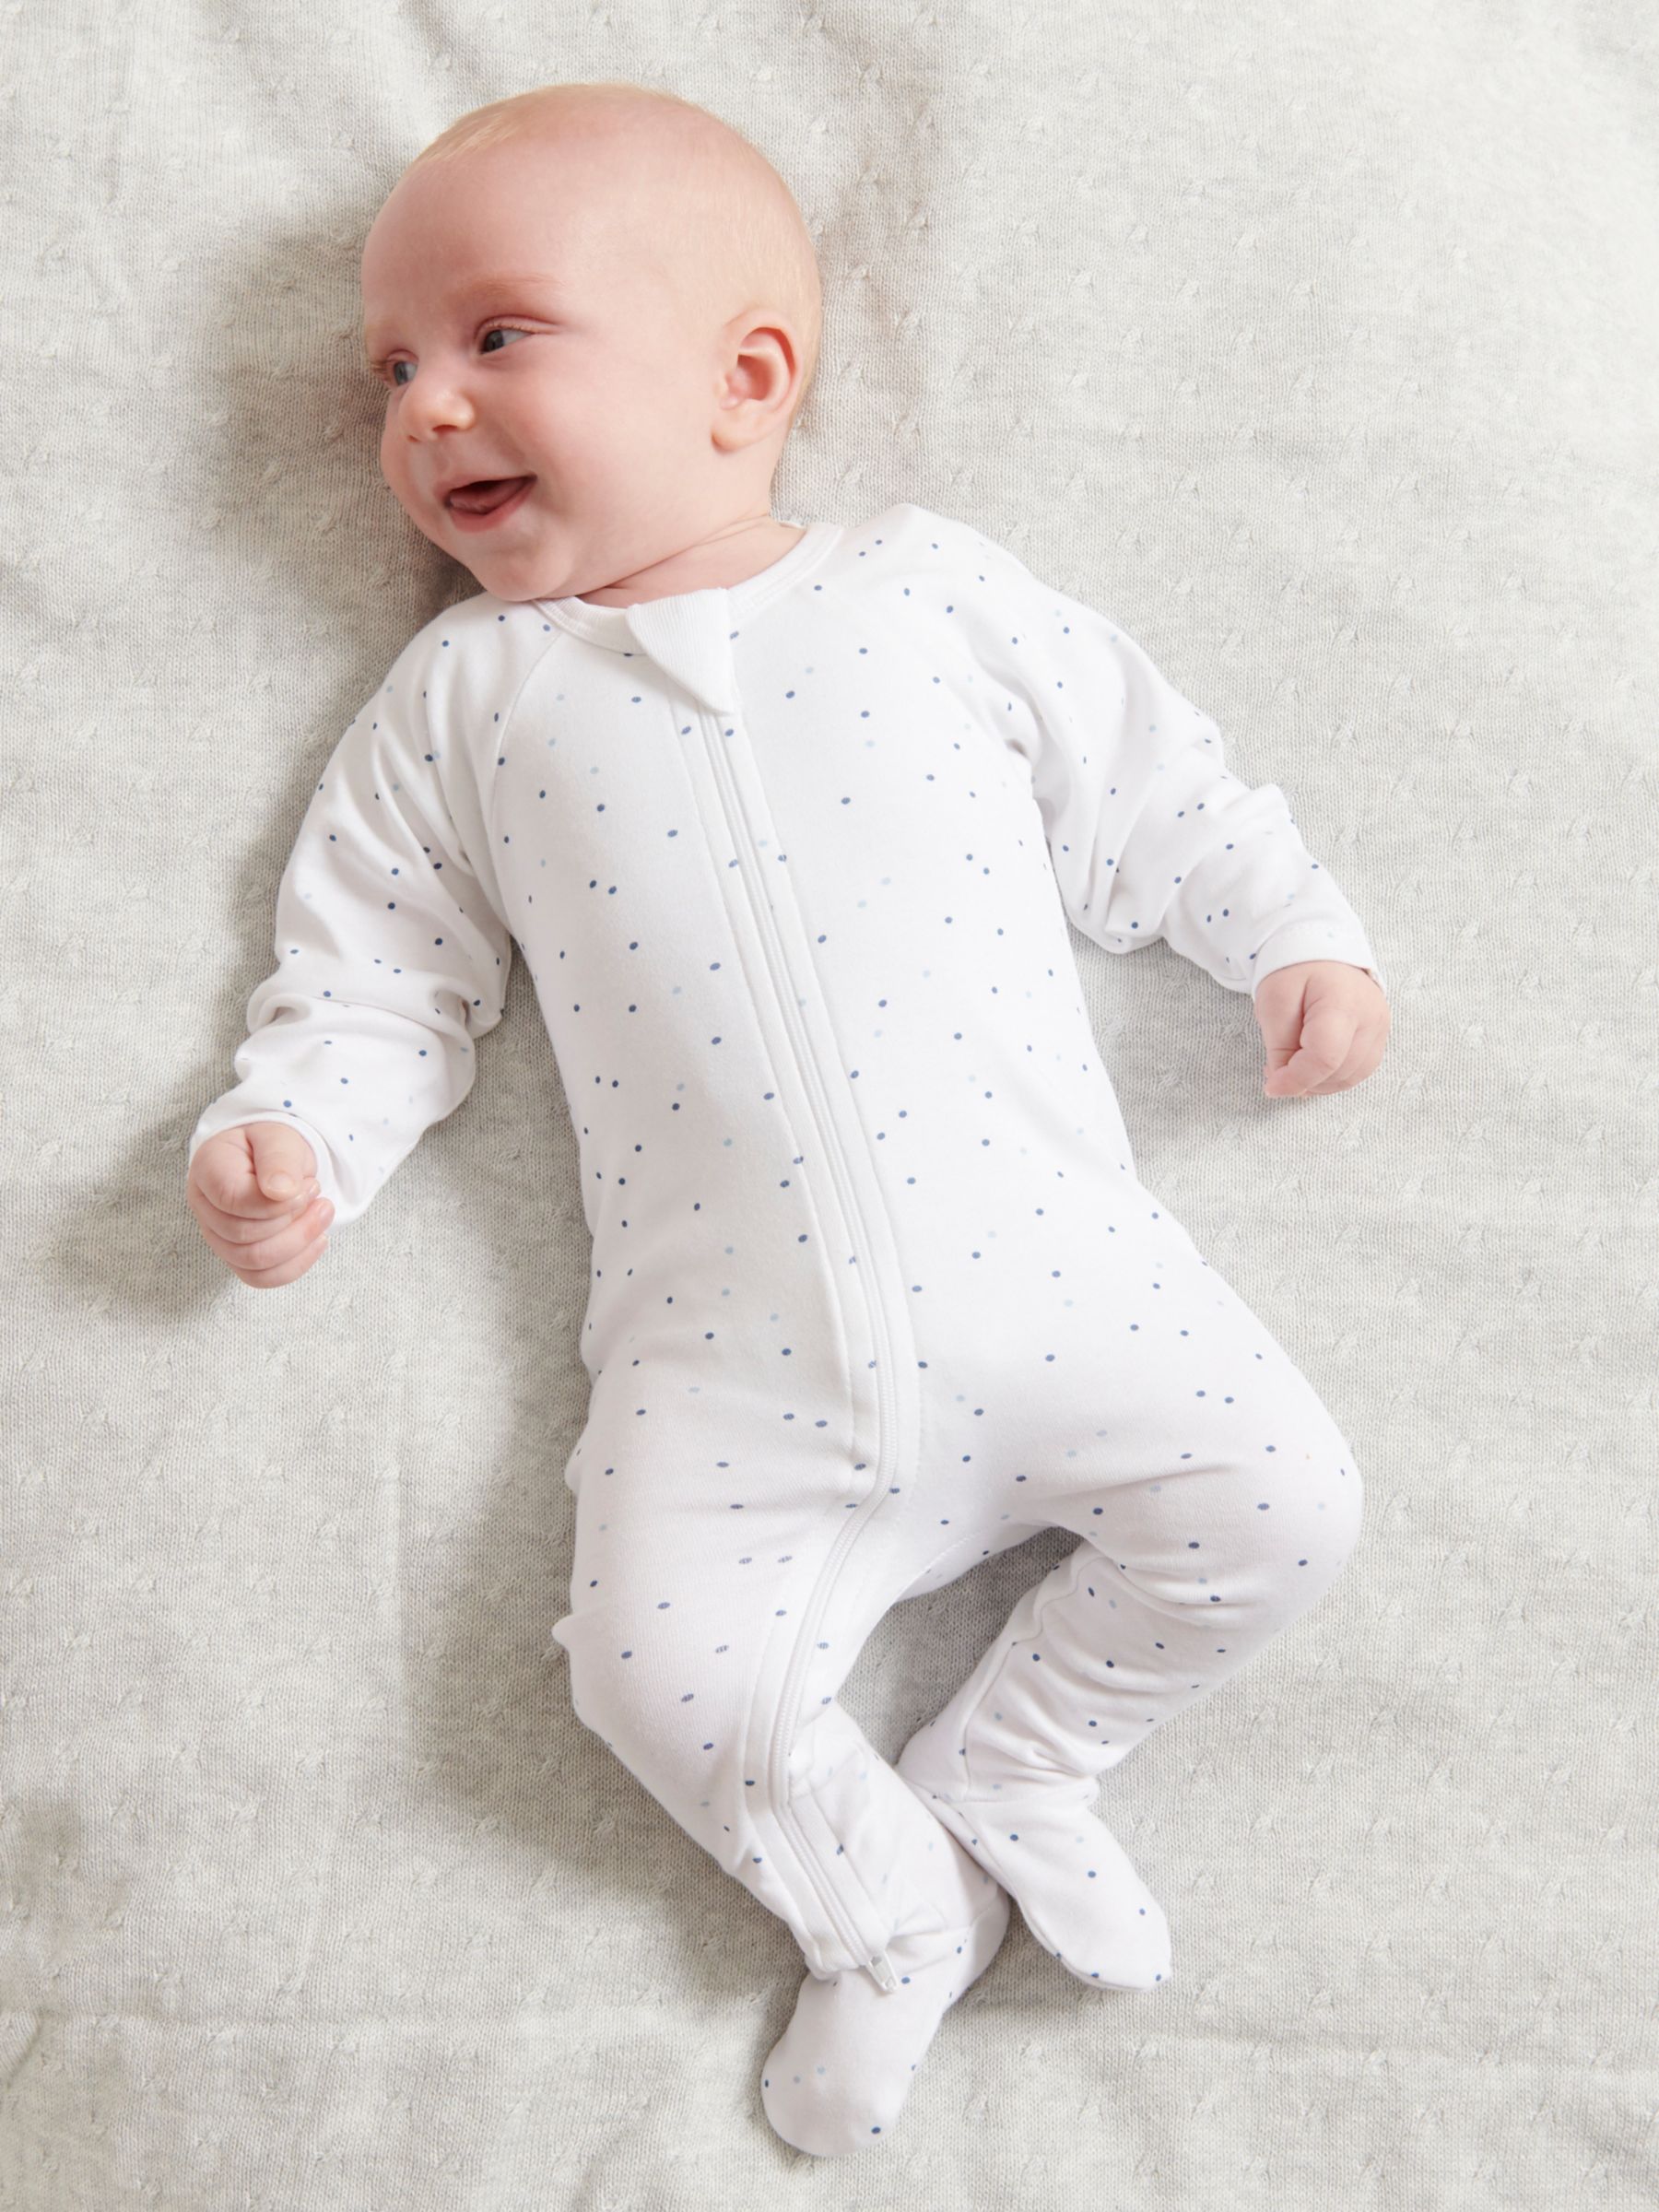 Purebaby Grow Suit, Pack of 2, Light Blue at John Lewis & Partners